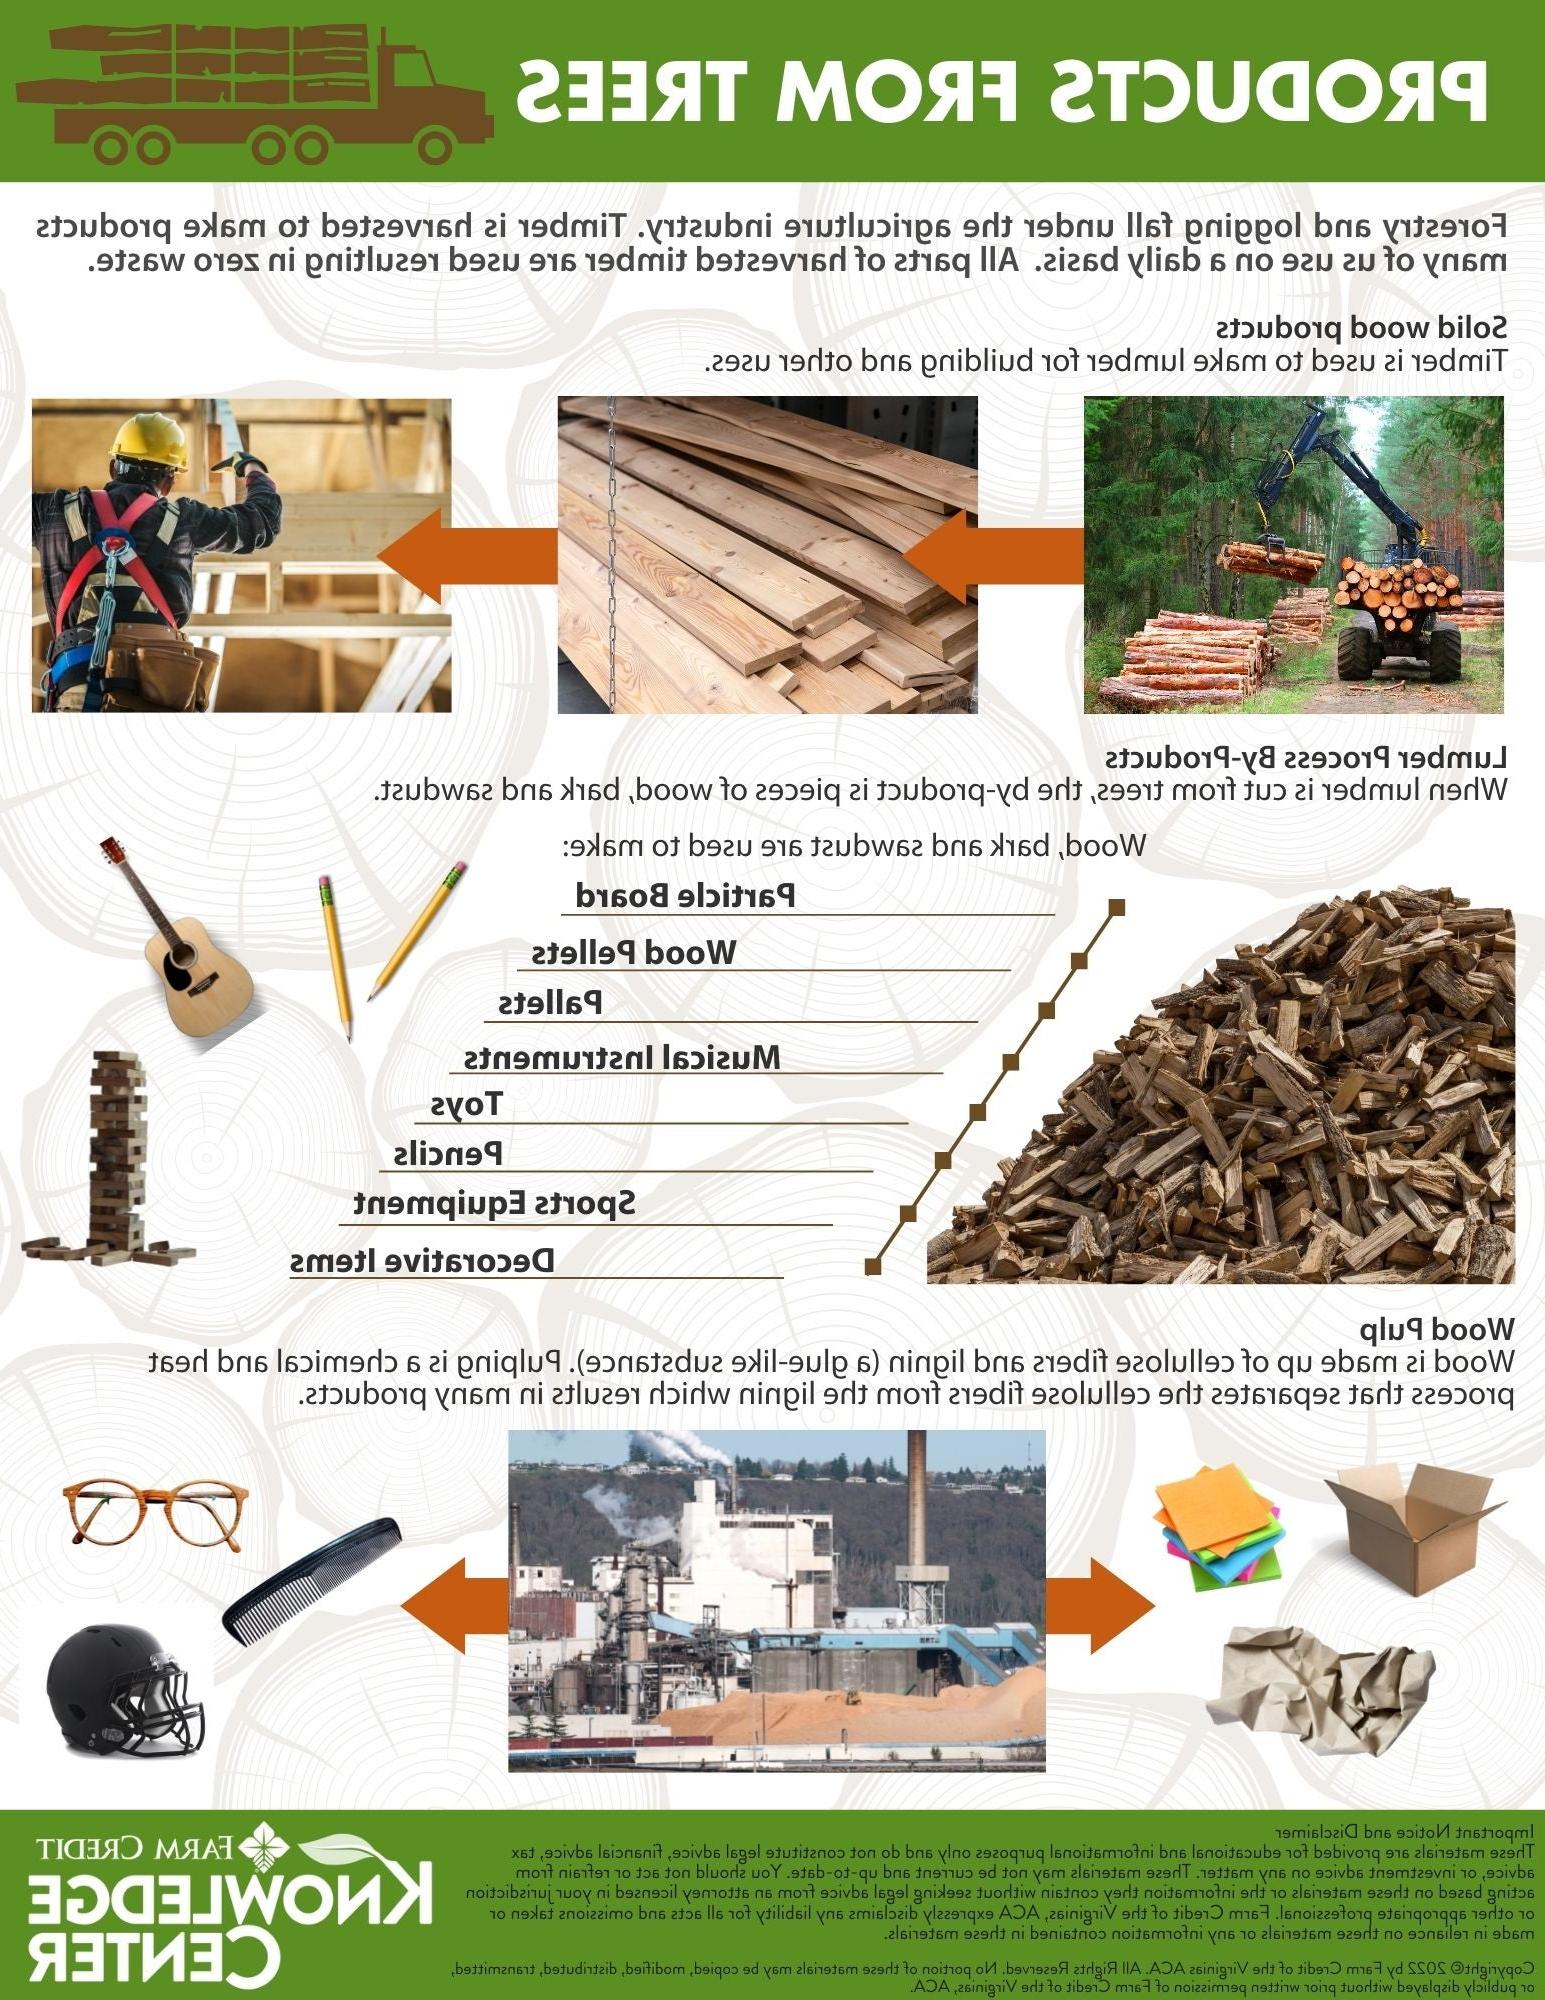 infographic on the products made from trees.